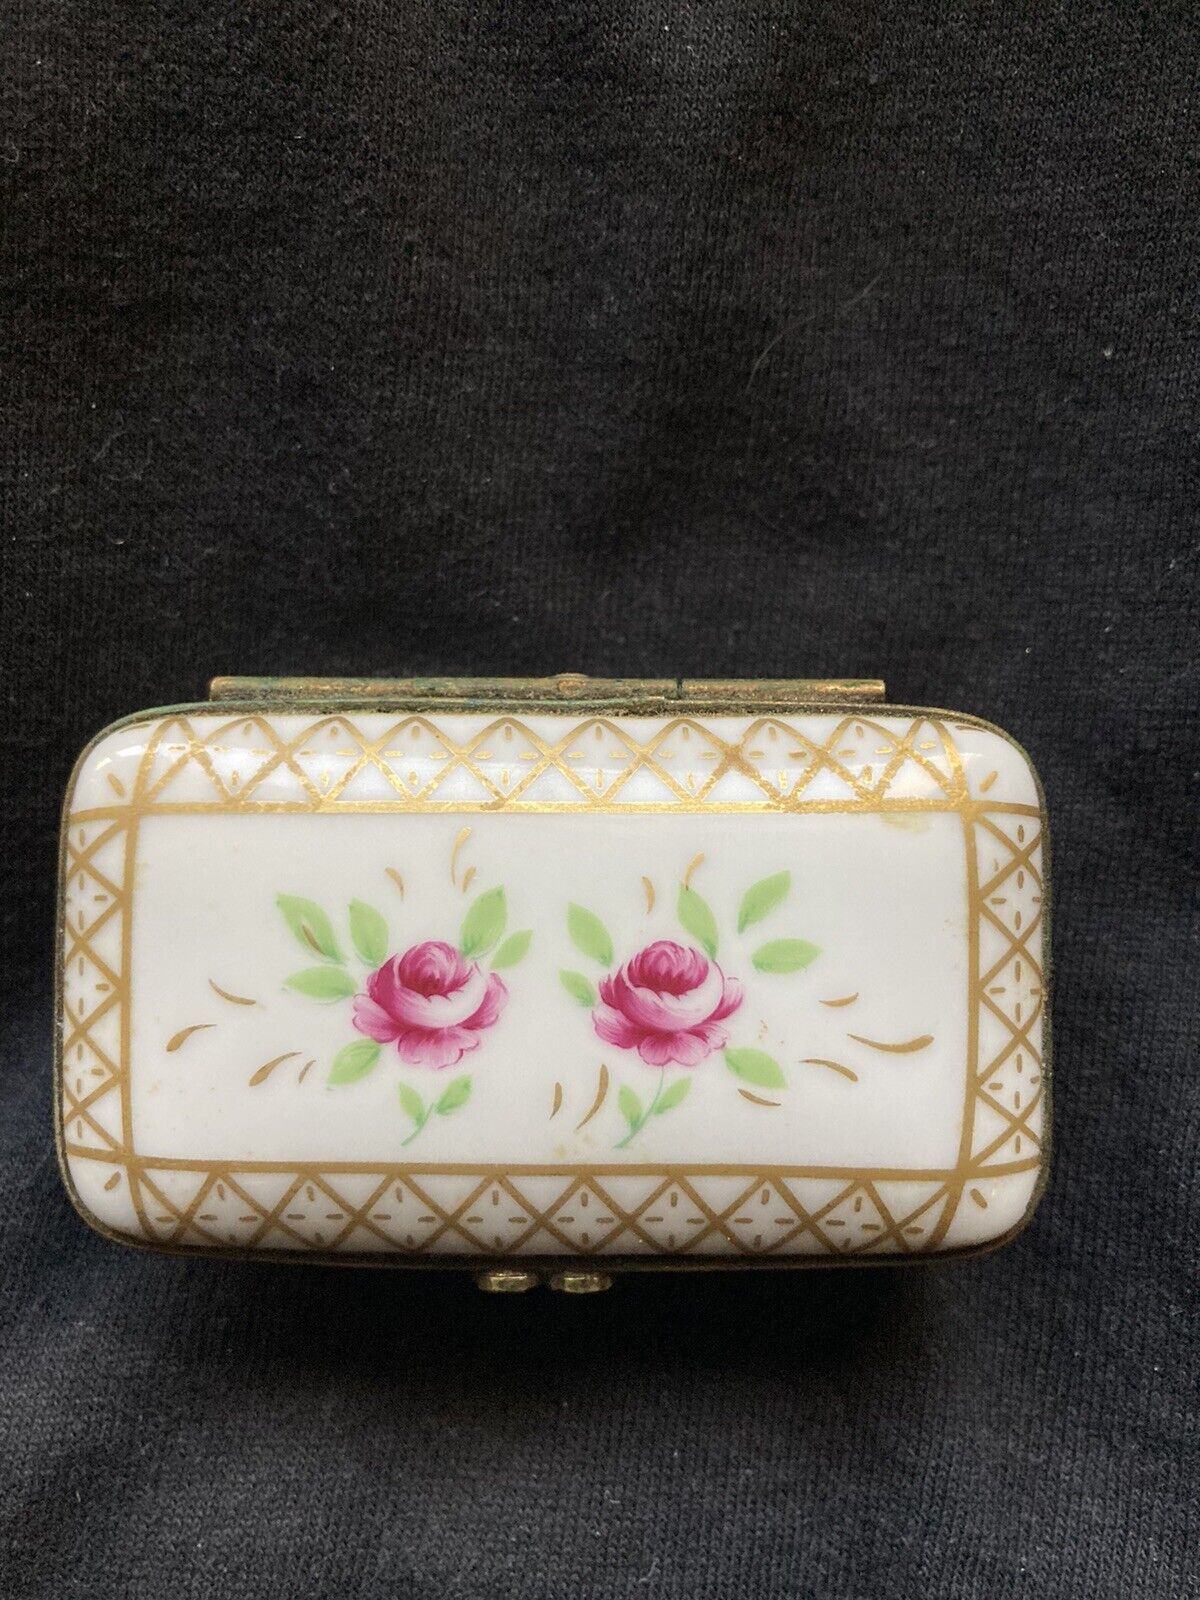 Limoges France Hand Painted Pink Roses Trinket Pill Jewelry Box Vintage Antique